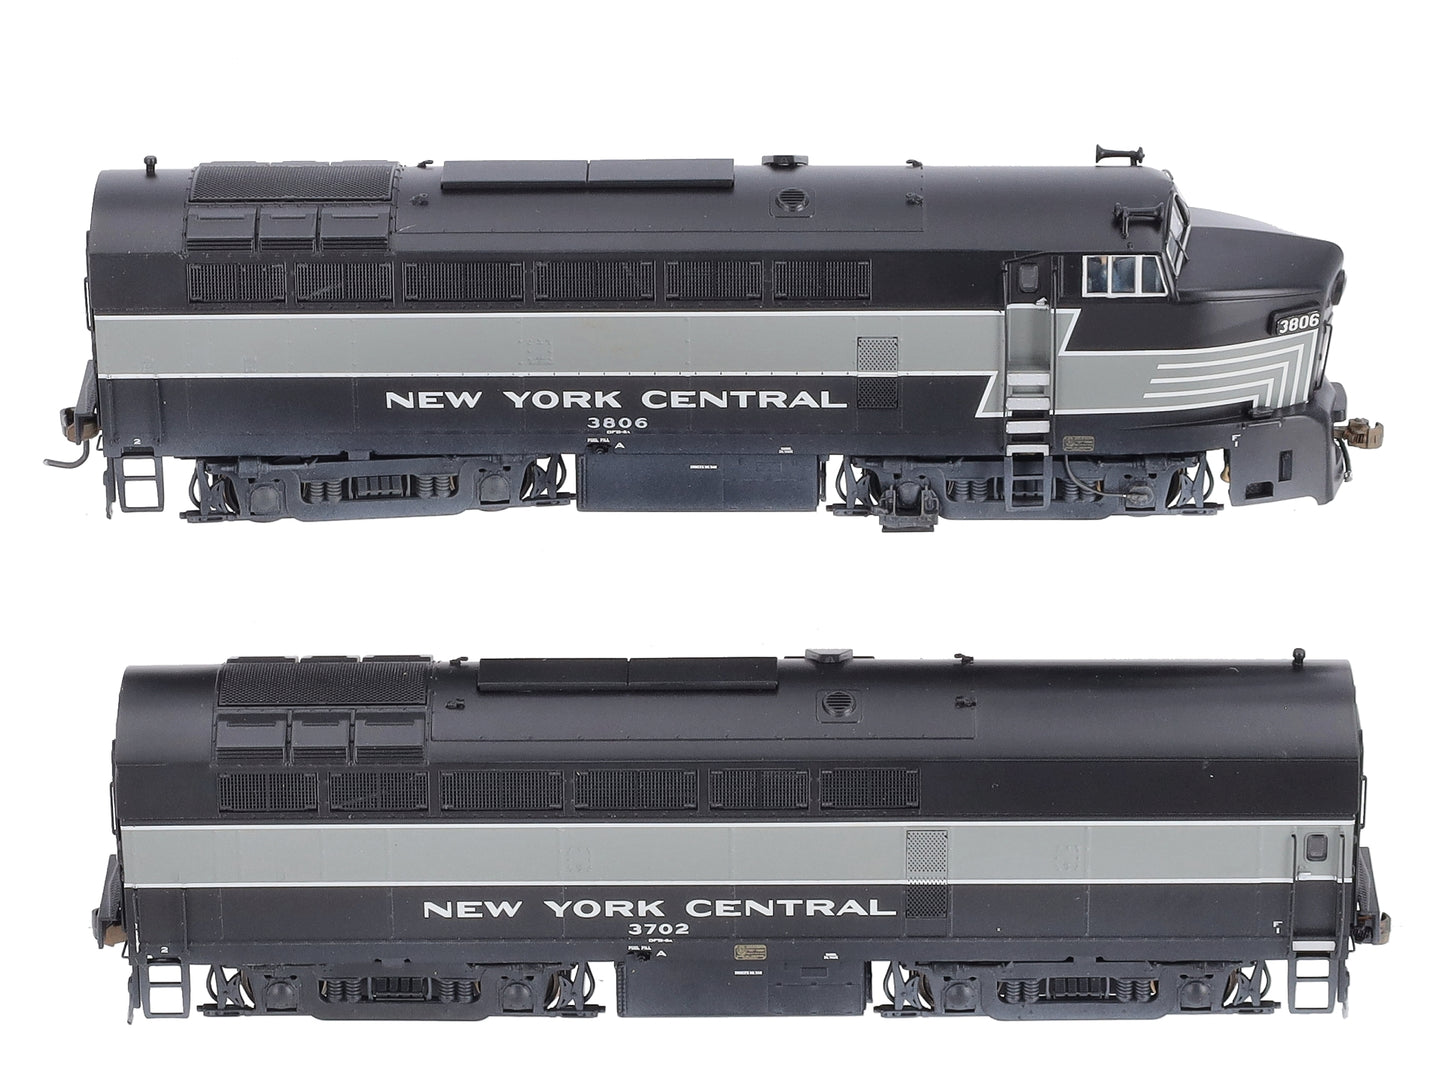 Broadway Limited 4144 HO New York Central Baldwin RF16 Sharknose #3806,3702